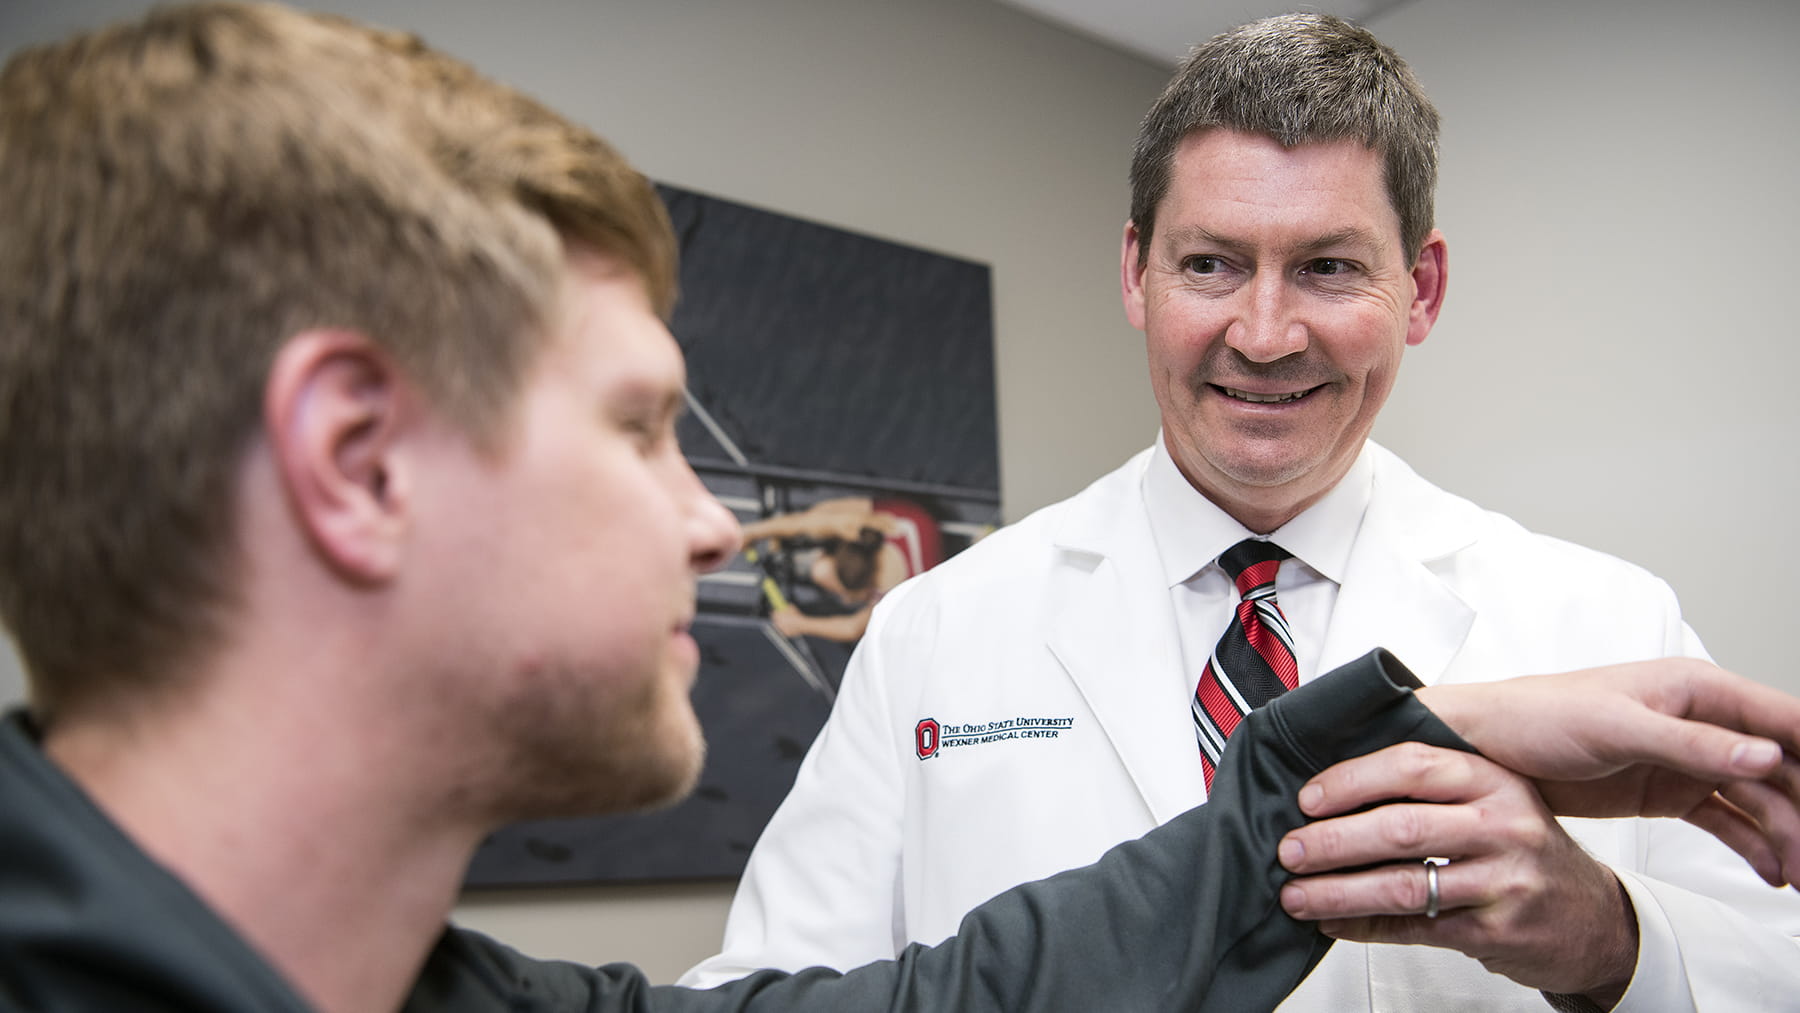 Grant Jones, MD at The Ohio State Sports Medicine Institute examining a man with a shoulder injury